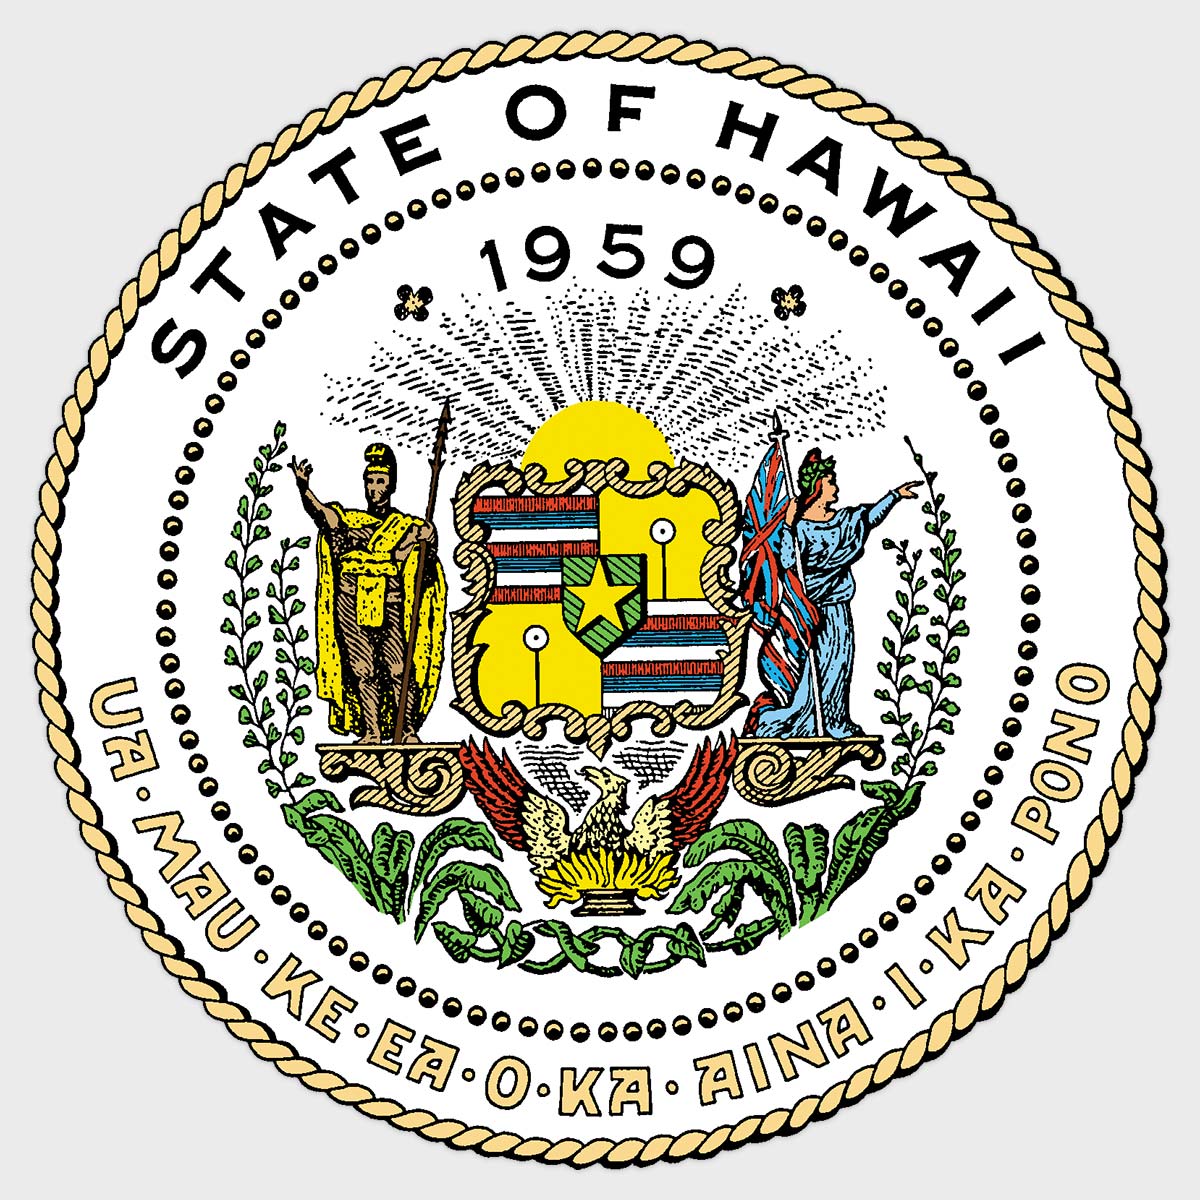 Governor Josh Green, M.D. | News Release – Healthy Hawaiʻi Strategic Plan 2030 Summit Provides Opportunity to Reflect and Reinvigorate Efforts to Create a Healthier Hawai‘i